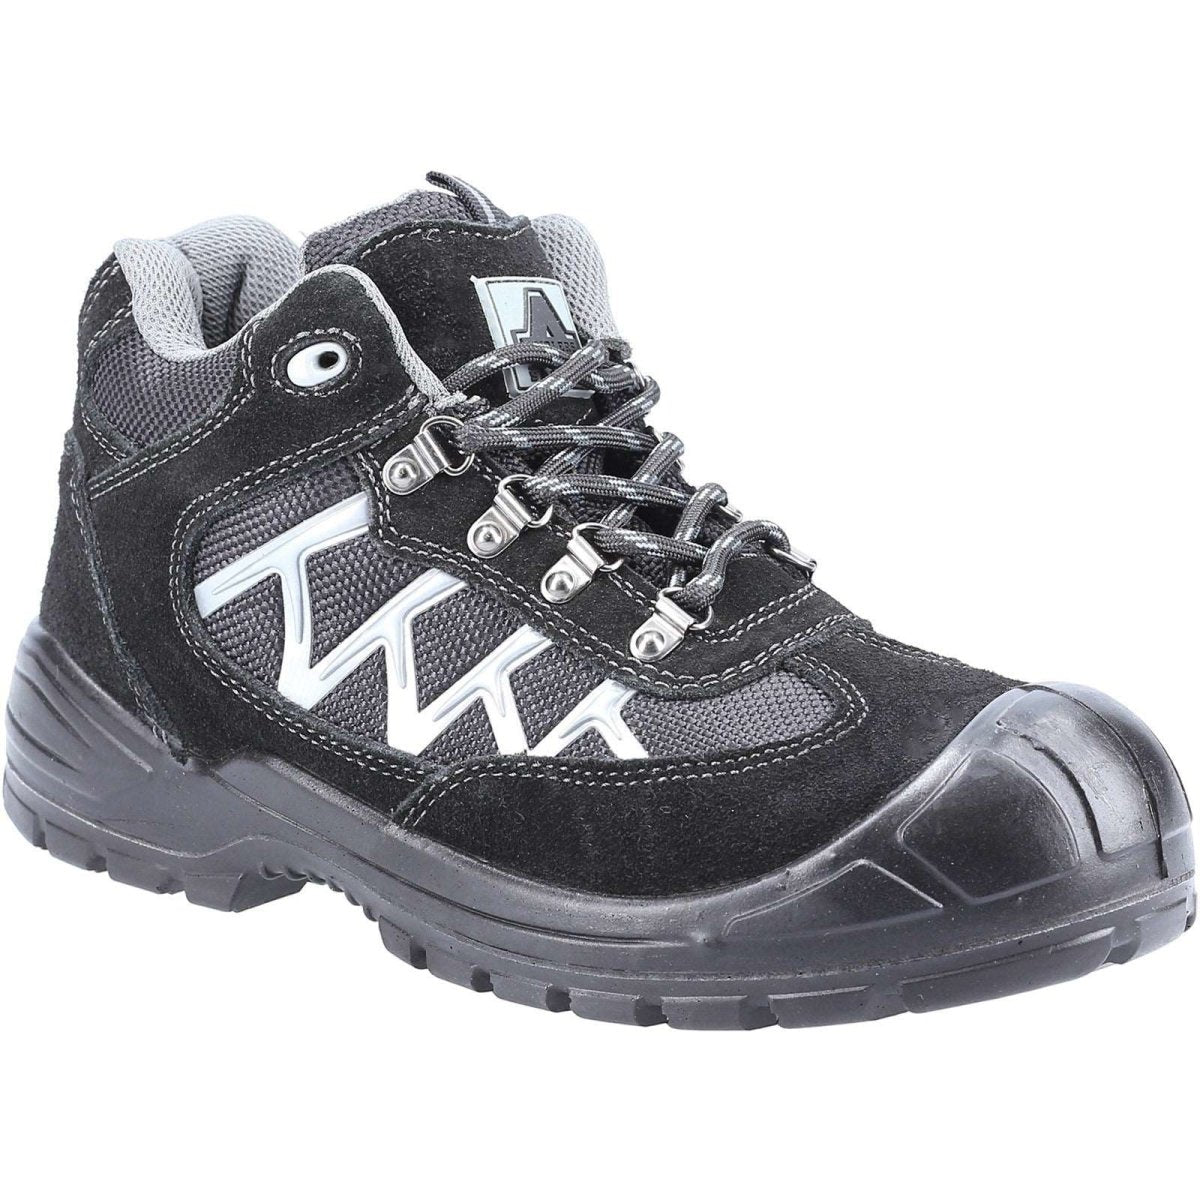 Amblers AS255 Suede Steel Toe & Midsole Safety Hiker Boots - Shoe Store Direct